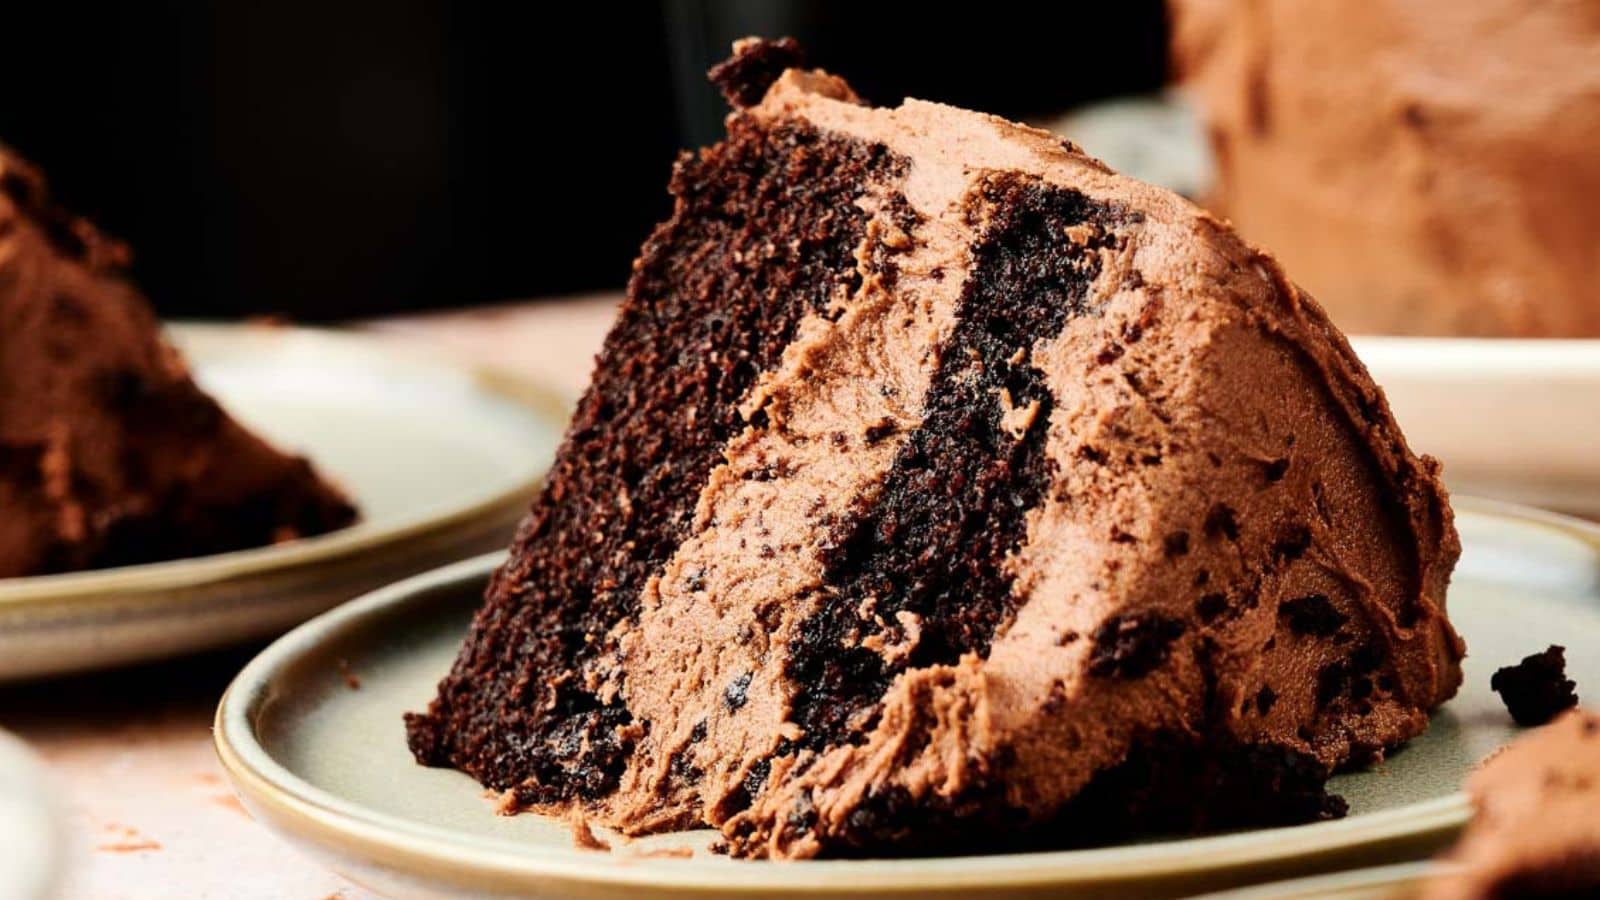 <p>Satisfy your sweet tooth quickly with this air fryer chocolate cake. Rich, moist, and delectable, it’s a hassle-free way to bake a cake without heating up your kitchen. Perfect for last-minute guests or when you need a quick dessert. This hack proves that the air fryer isn’t just for savory dishes.<br><strong>Get the Recipe: </strong><a href="https://www.splashoftaste.com/air-fryer-cake/?utm_source=msn&utm_medium=page&utm_campaign=msn">Air Fryer Chocolate Cake</a></p>